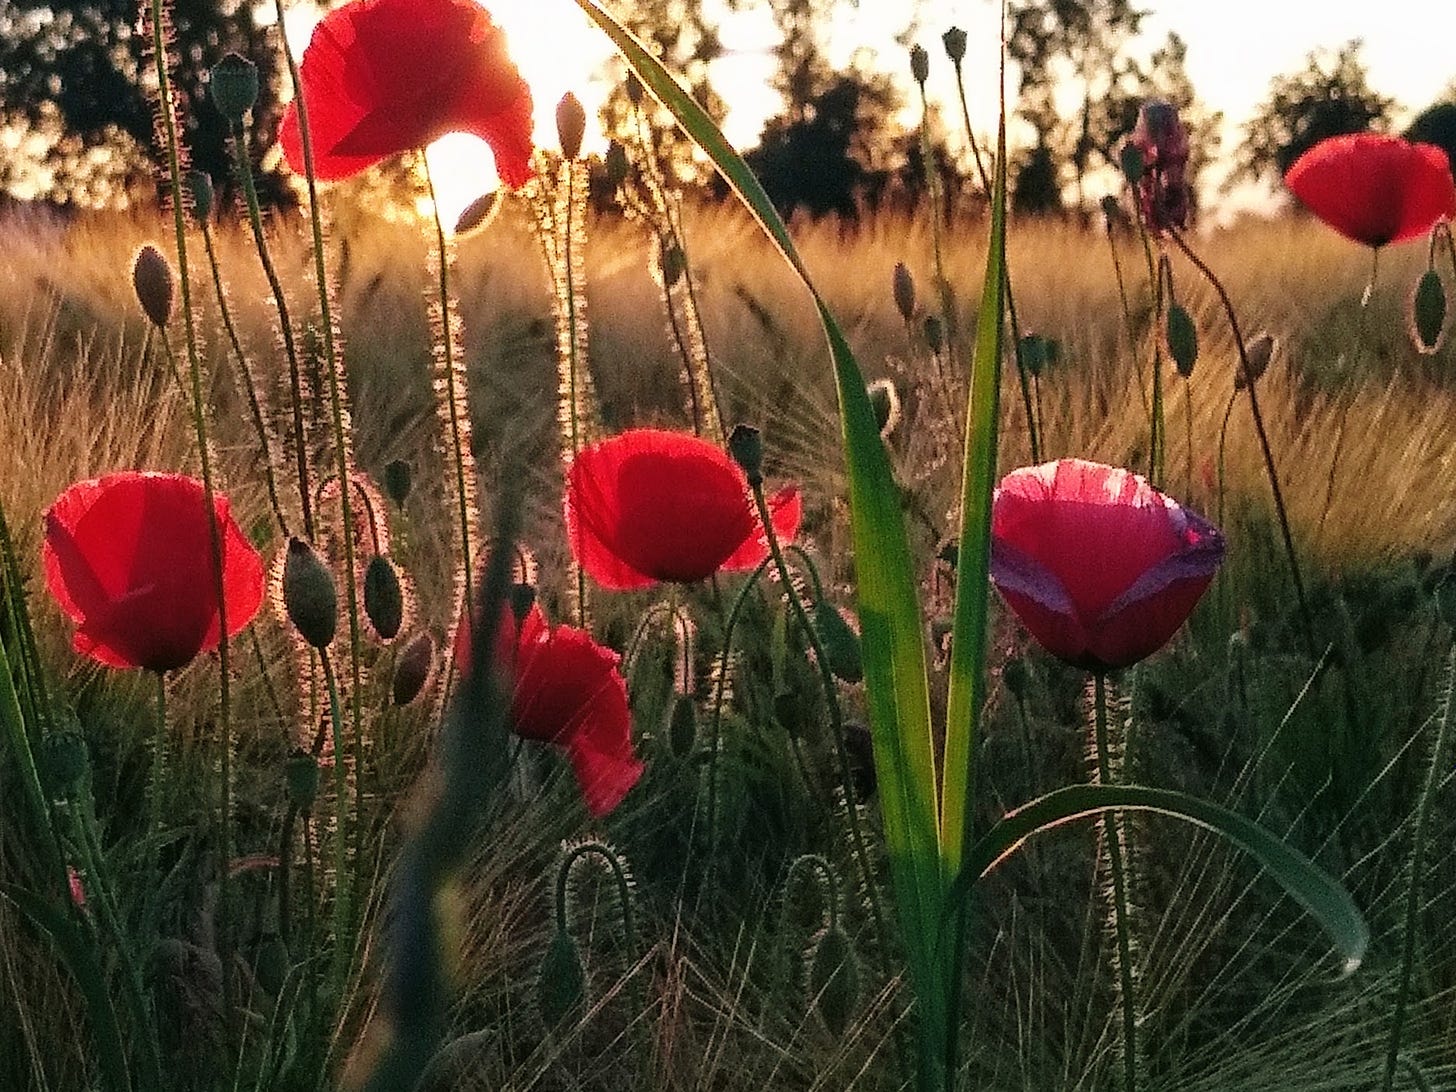 A clutch of red poppies in a wheat field are backlit by the setting sun.